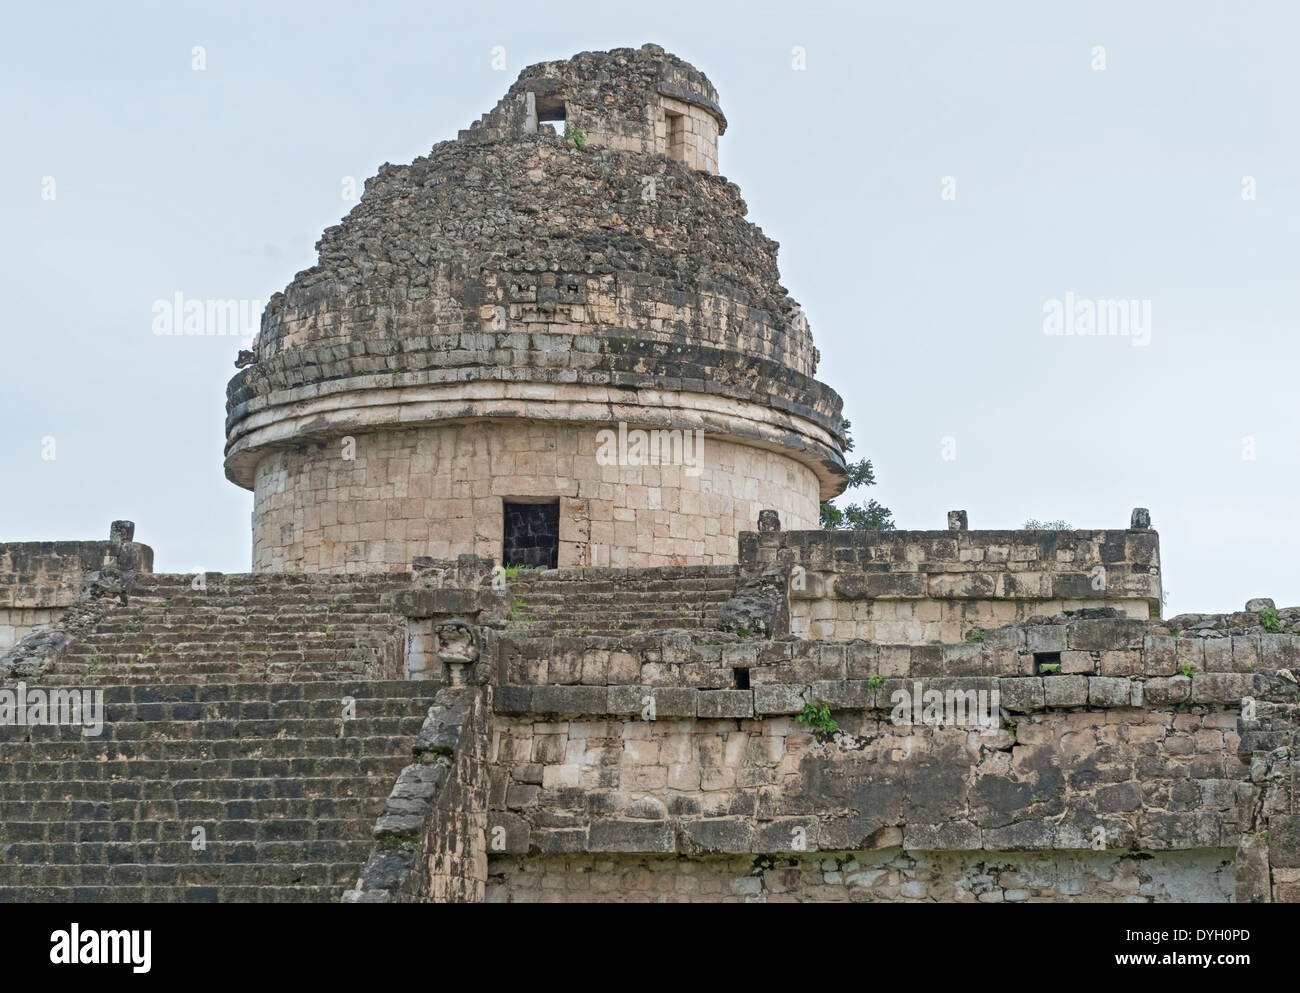 An ancient astronomical observatory in Chichen Itza Mayan city, Mexico Stock Photo